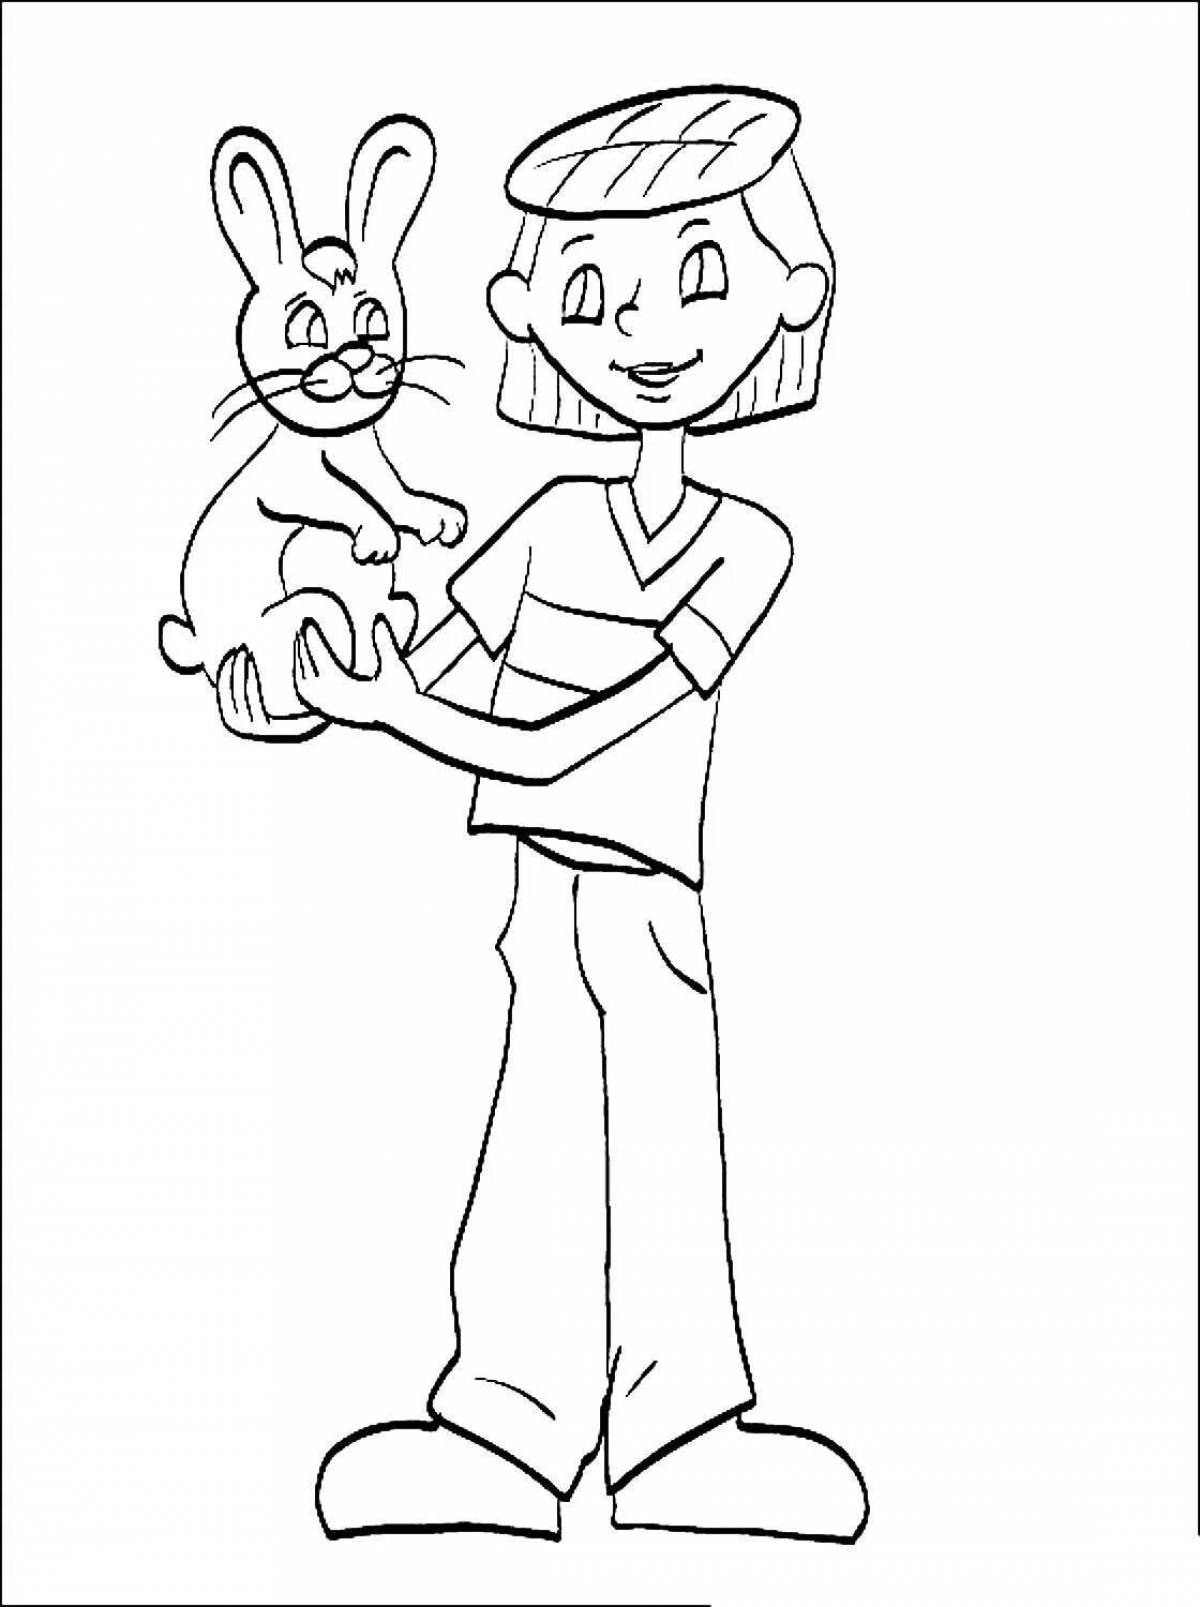 Coloring page charming uncle